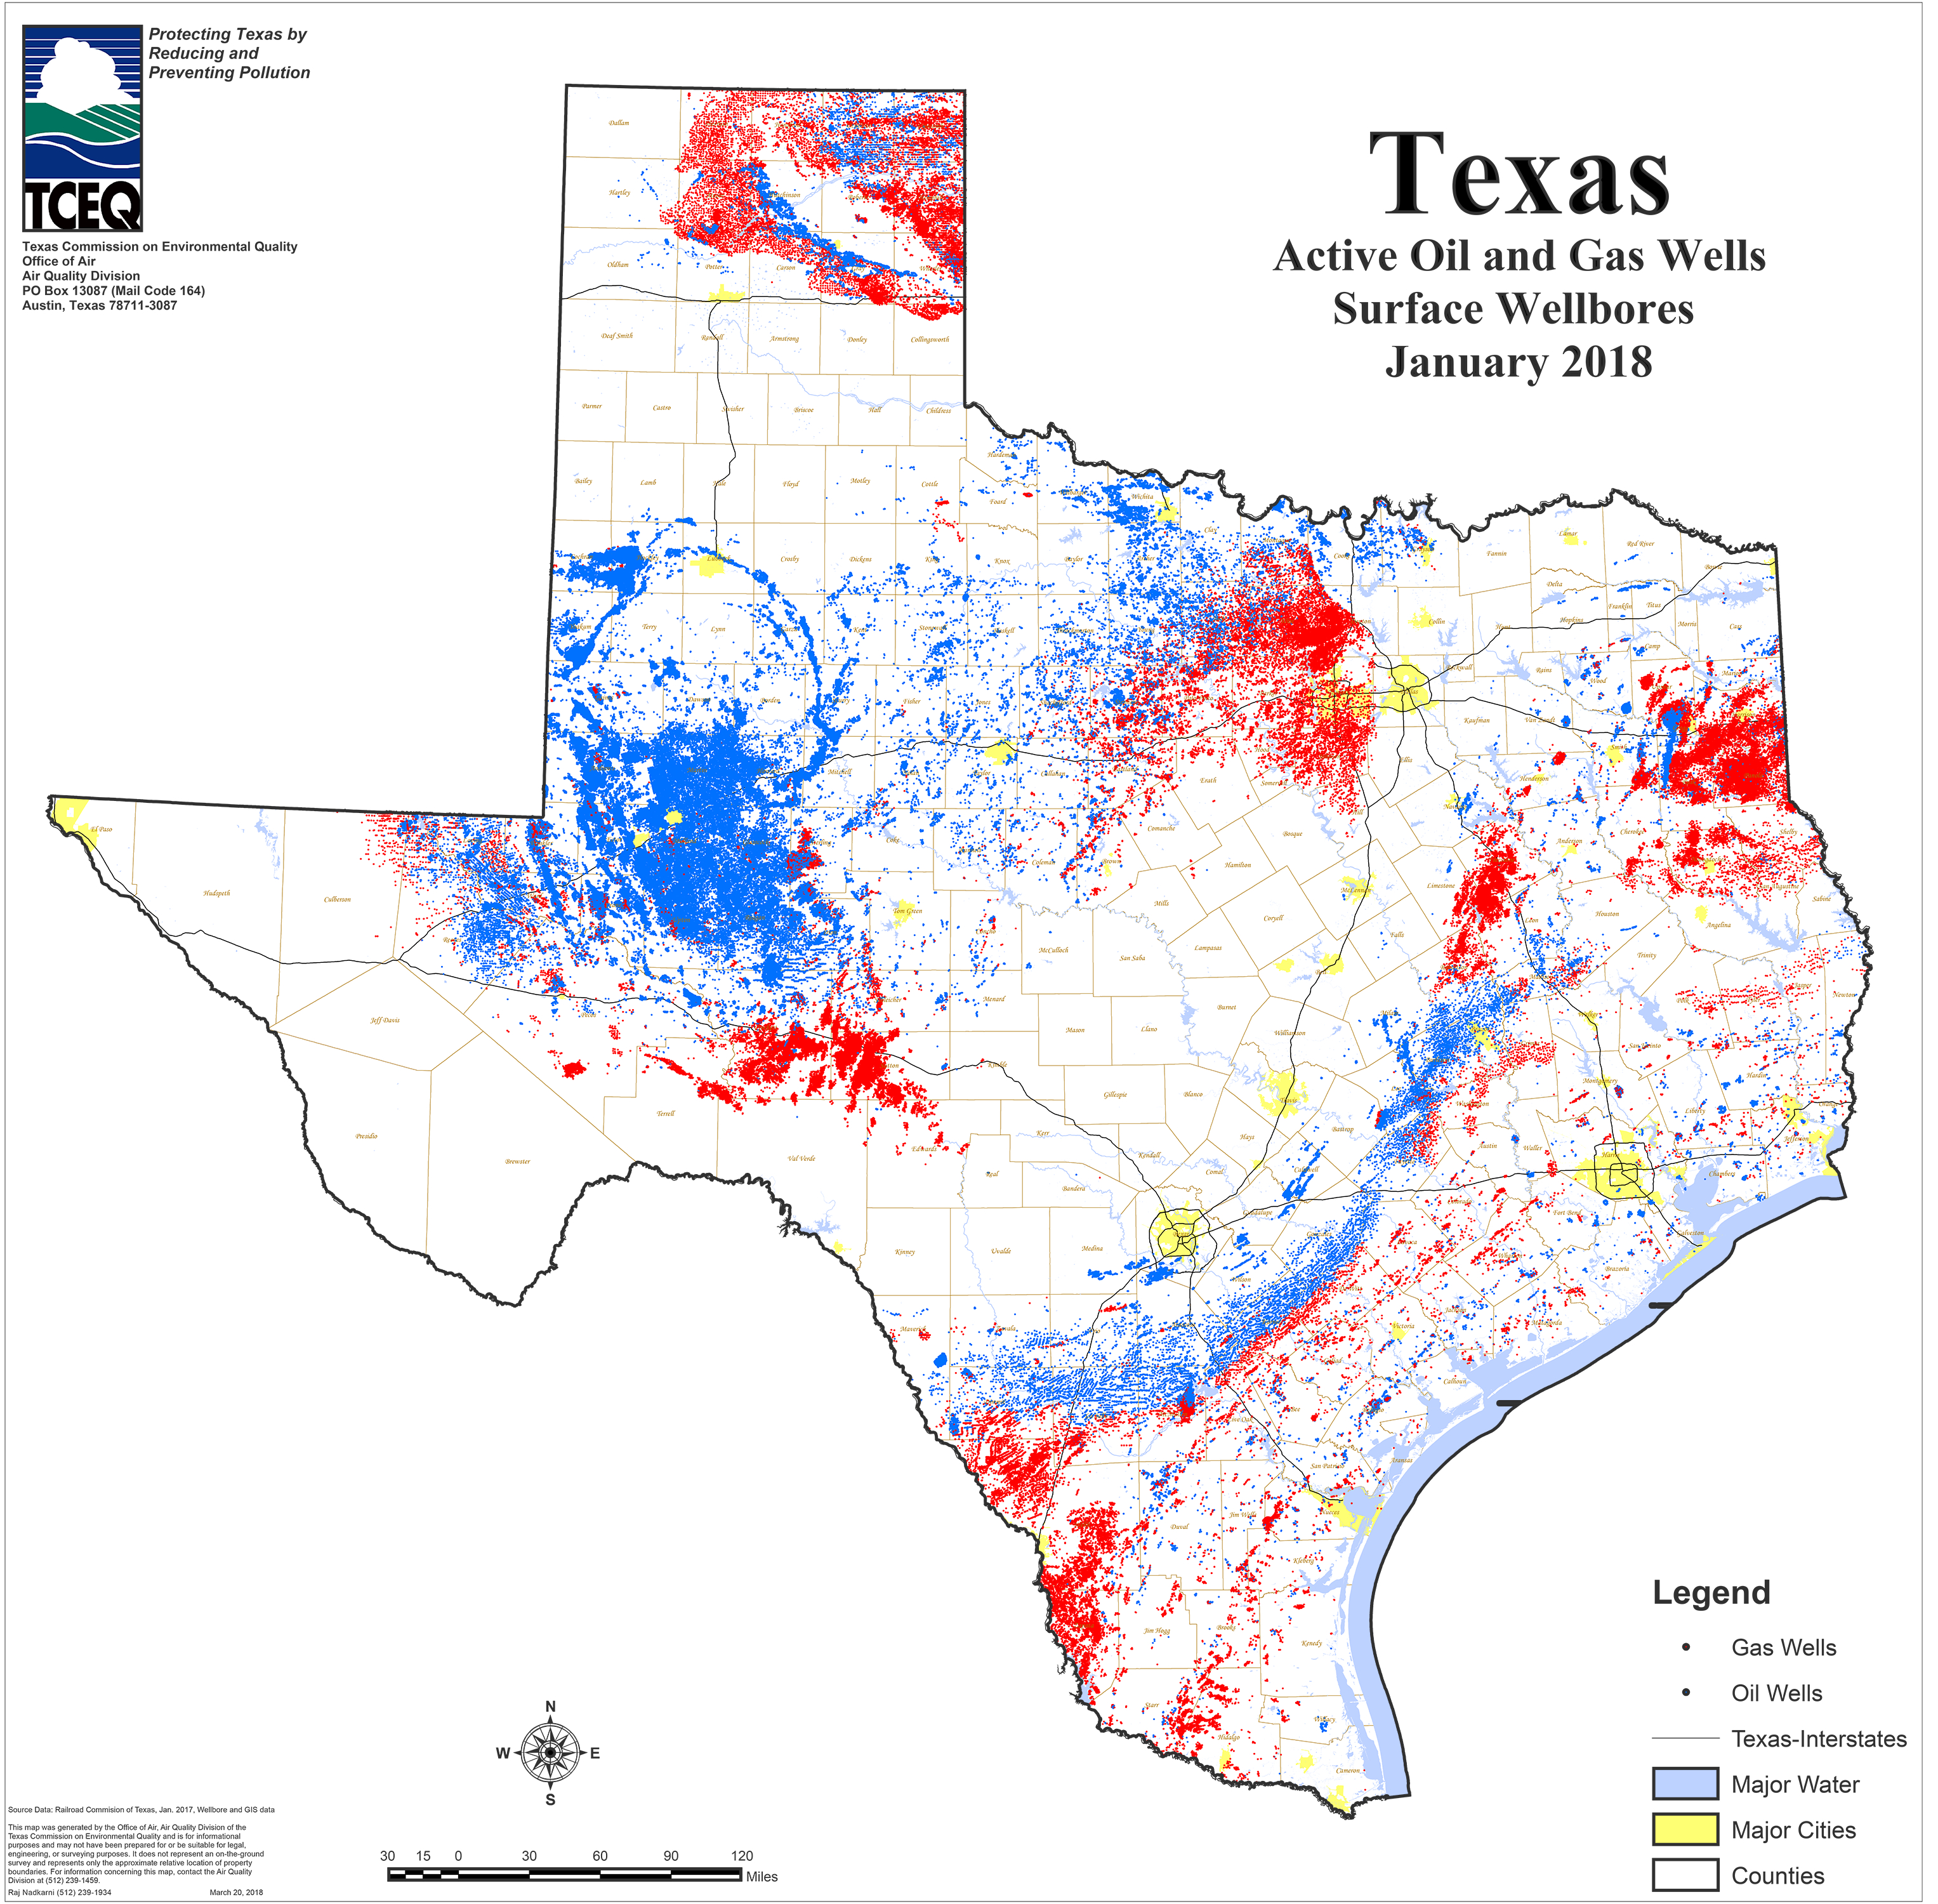 Barnett Shale Maps And Charts - Tceq - Www.tceq.texas.gov - Texas Oil And Gas Lease Maps